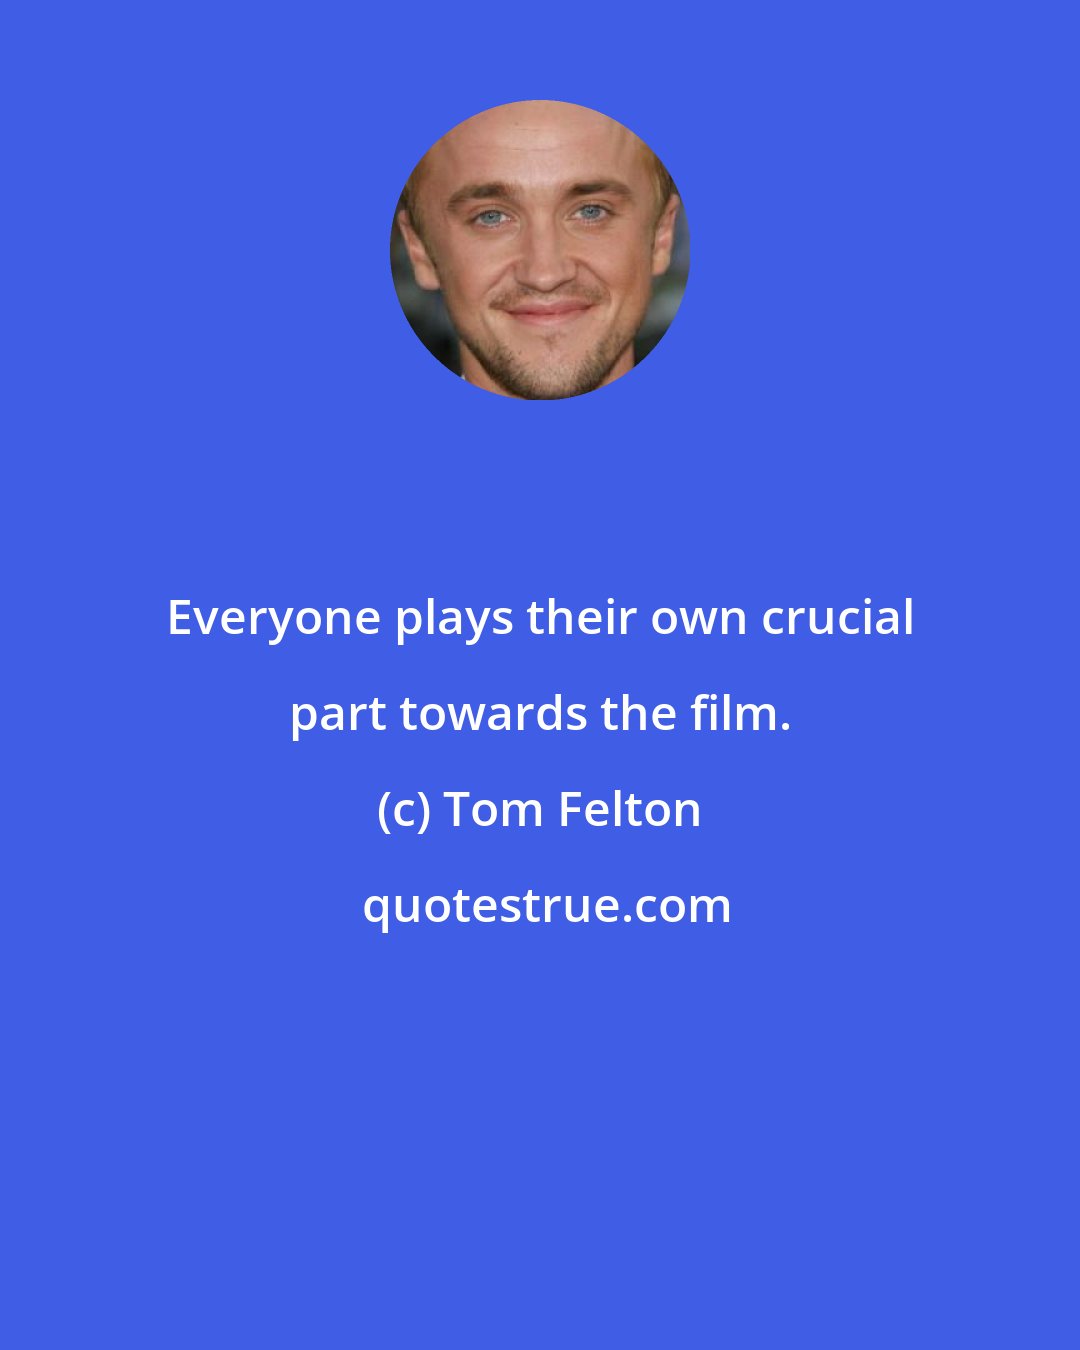 Tom Felton: Everyone plays their own crucial part towards the film.